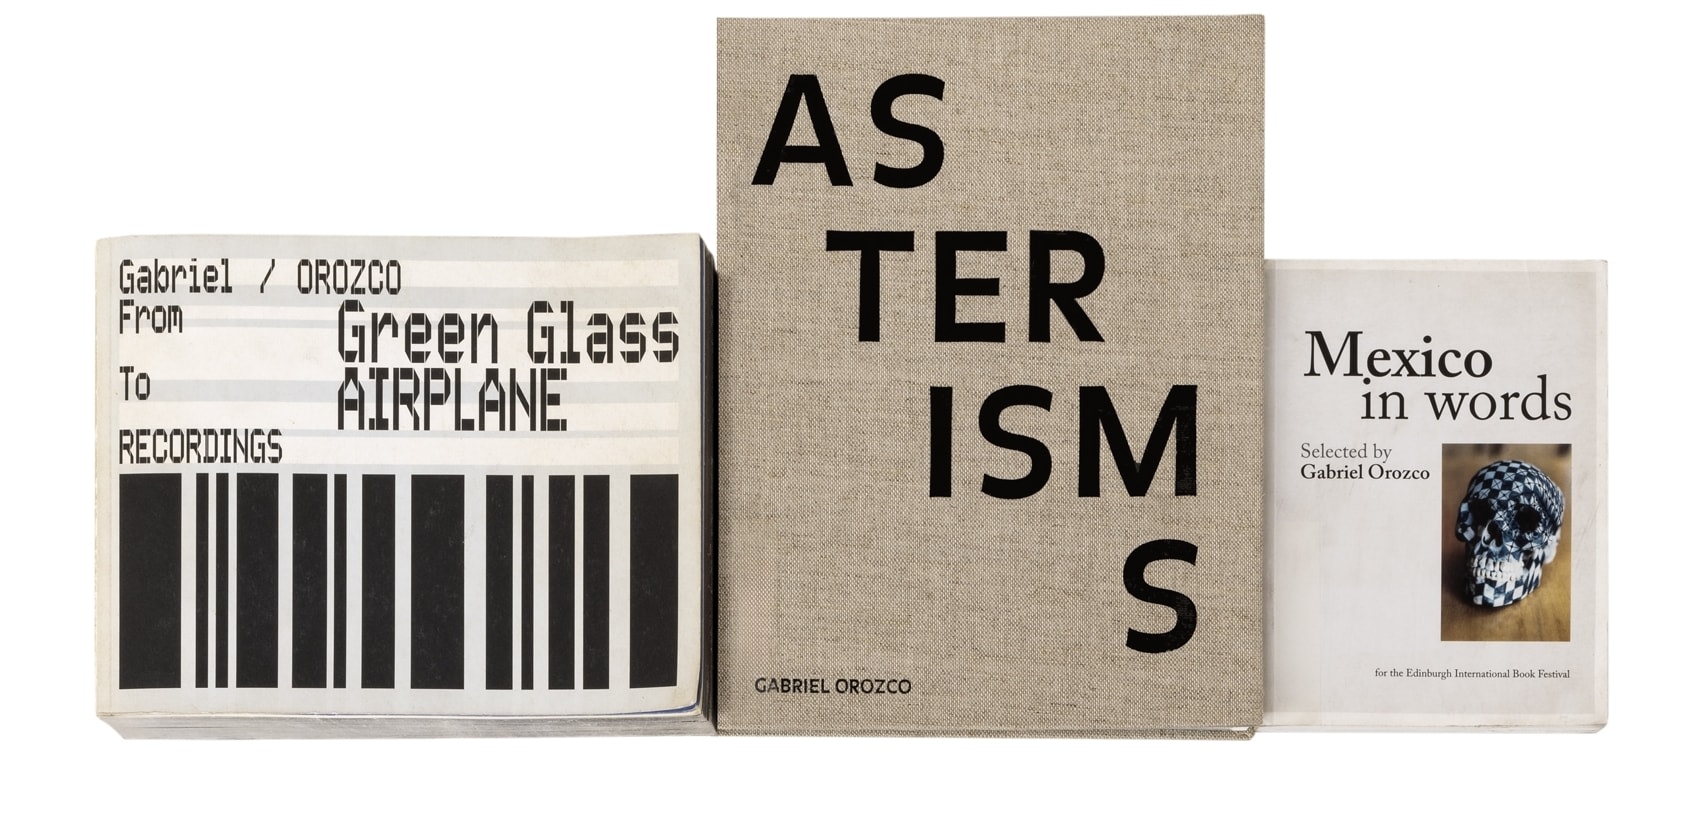 From left to right: Gabriel Orozco: From Green Glass to Airplane Recordings (Amsterdam: Artimo Foundation and Stedelijk Museum, 2001); Asterisms: Gabriel Orozco (Berlin: Guggenheim, 2012); Mexico in Words: Selected by Gabriel Orozco (Edinburgh: The Fruitmarket Gallery, 2015)